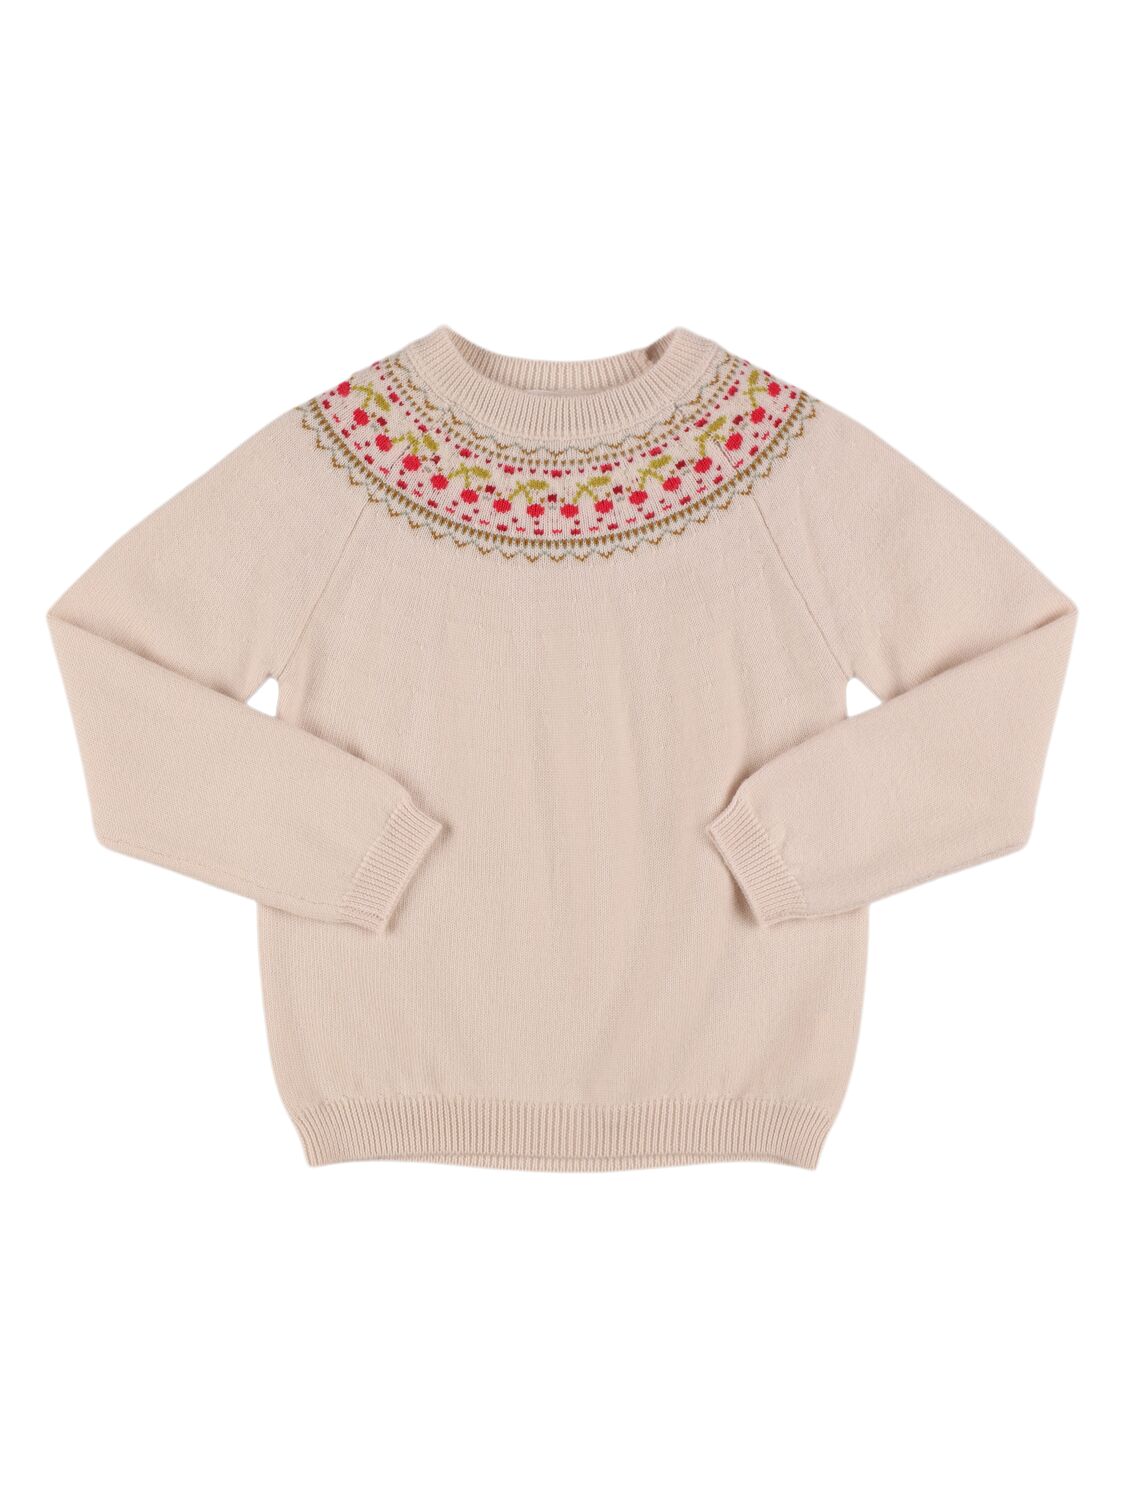 Bonpoint Jacquard Wool Knit Sweater In Pink